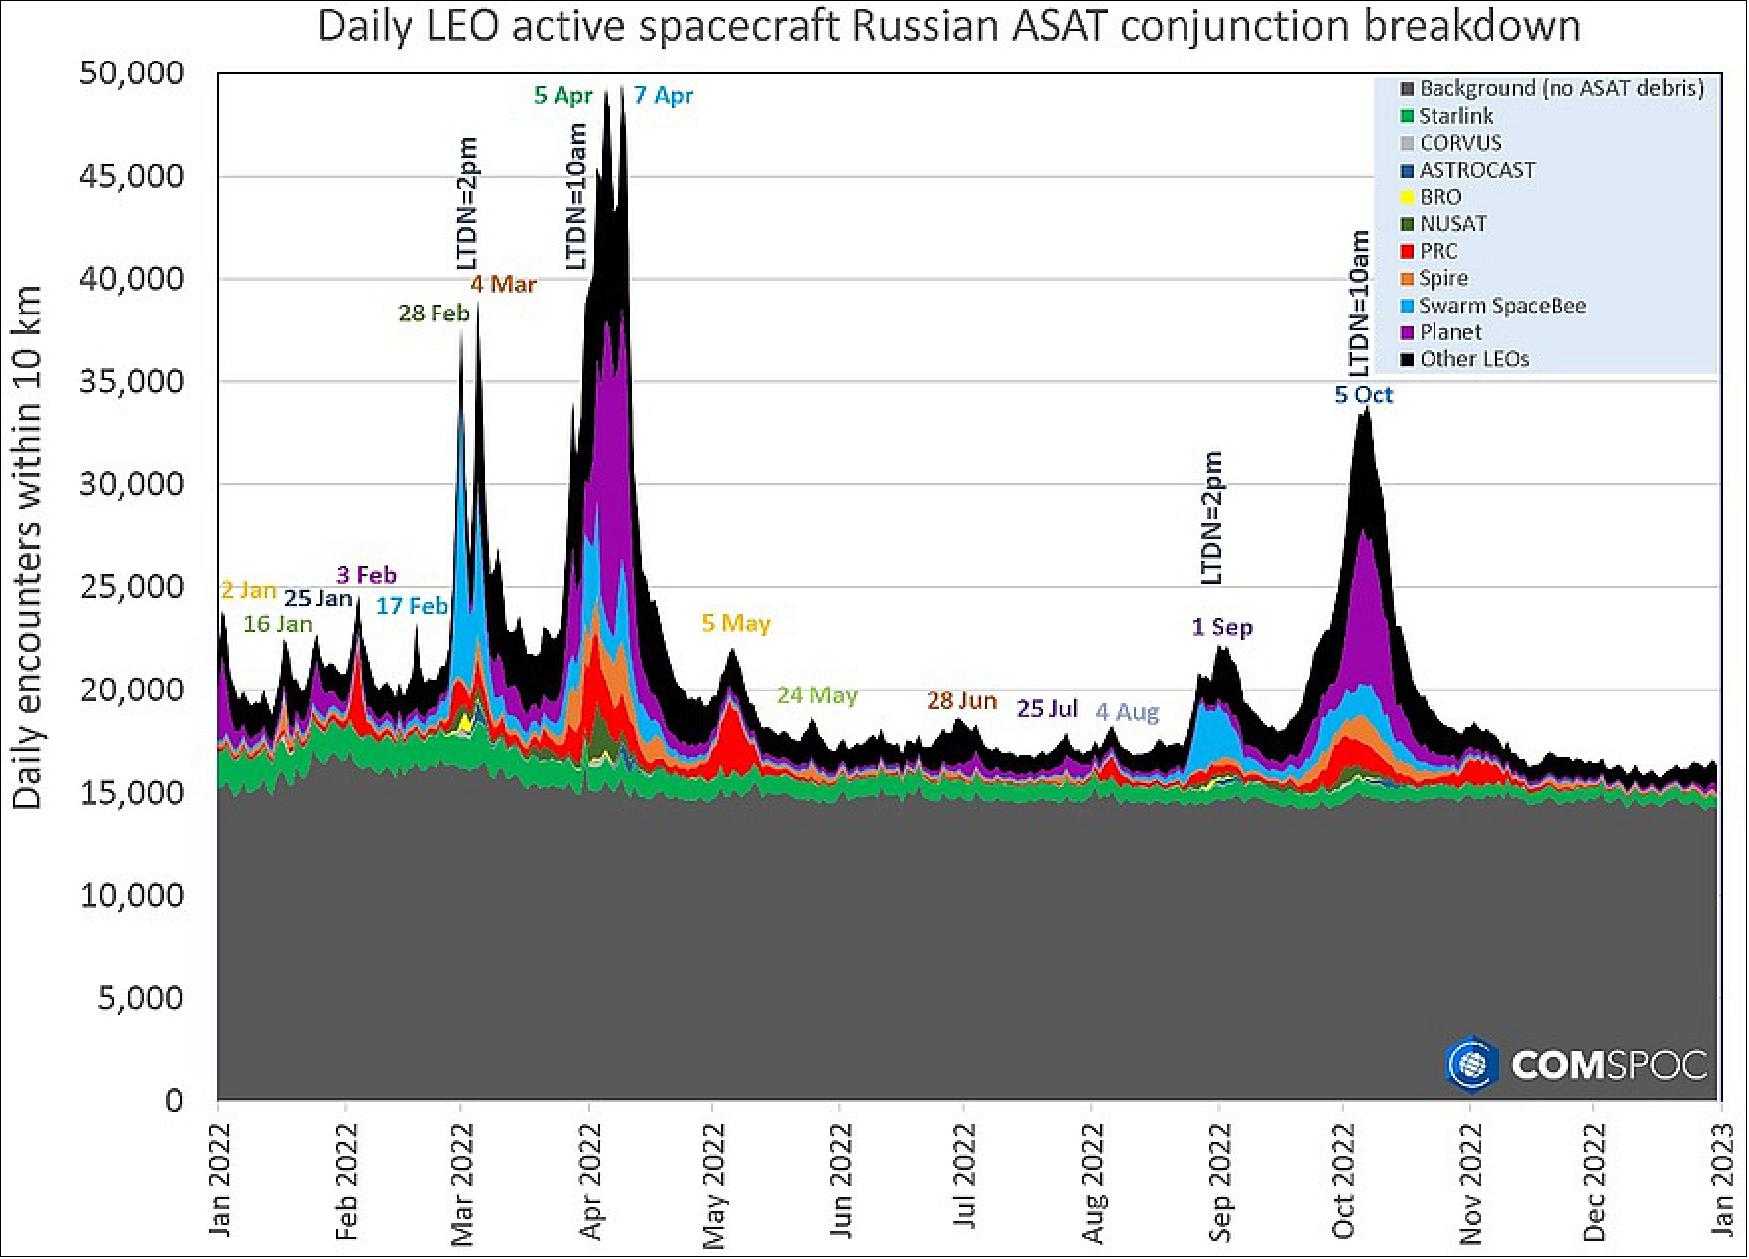 Figure 2: A chart showing the peaks in conjunctions with active satellites in LEO caused by the Russian ASAT debris (image credit: COMSPOC)